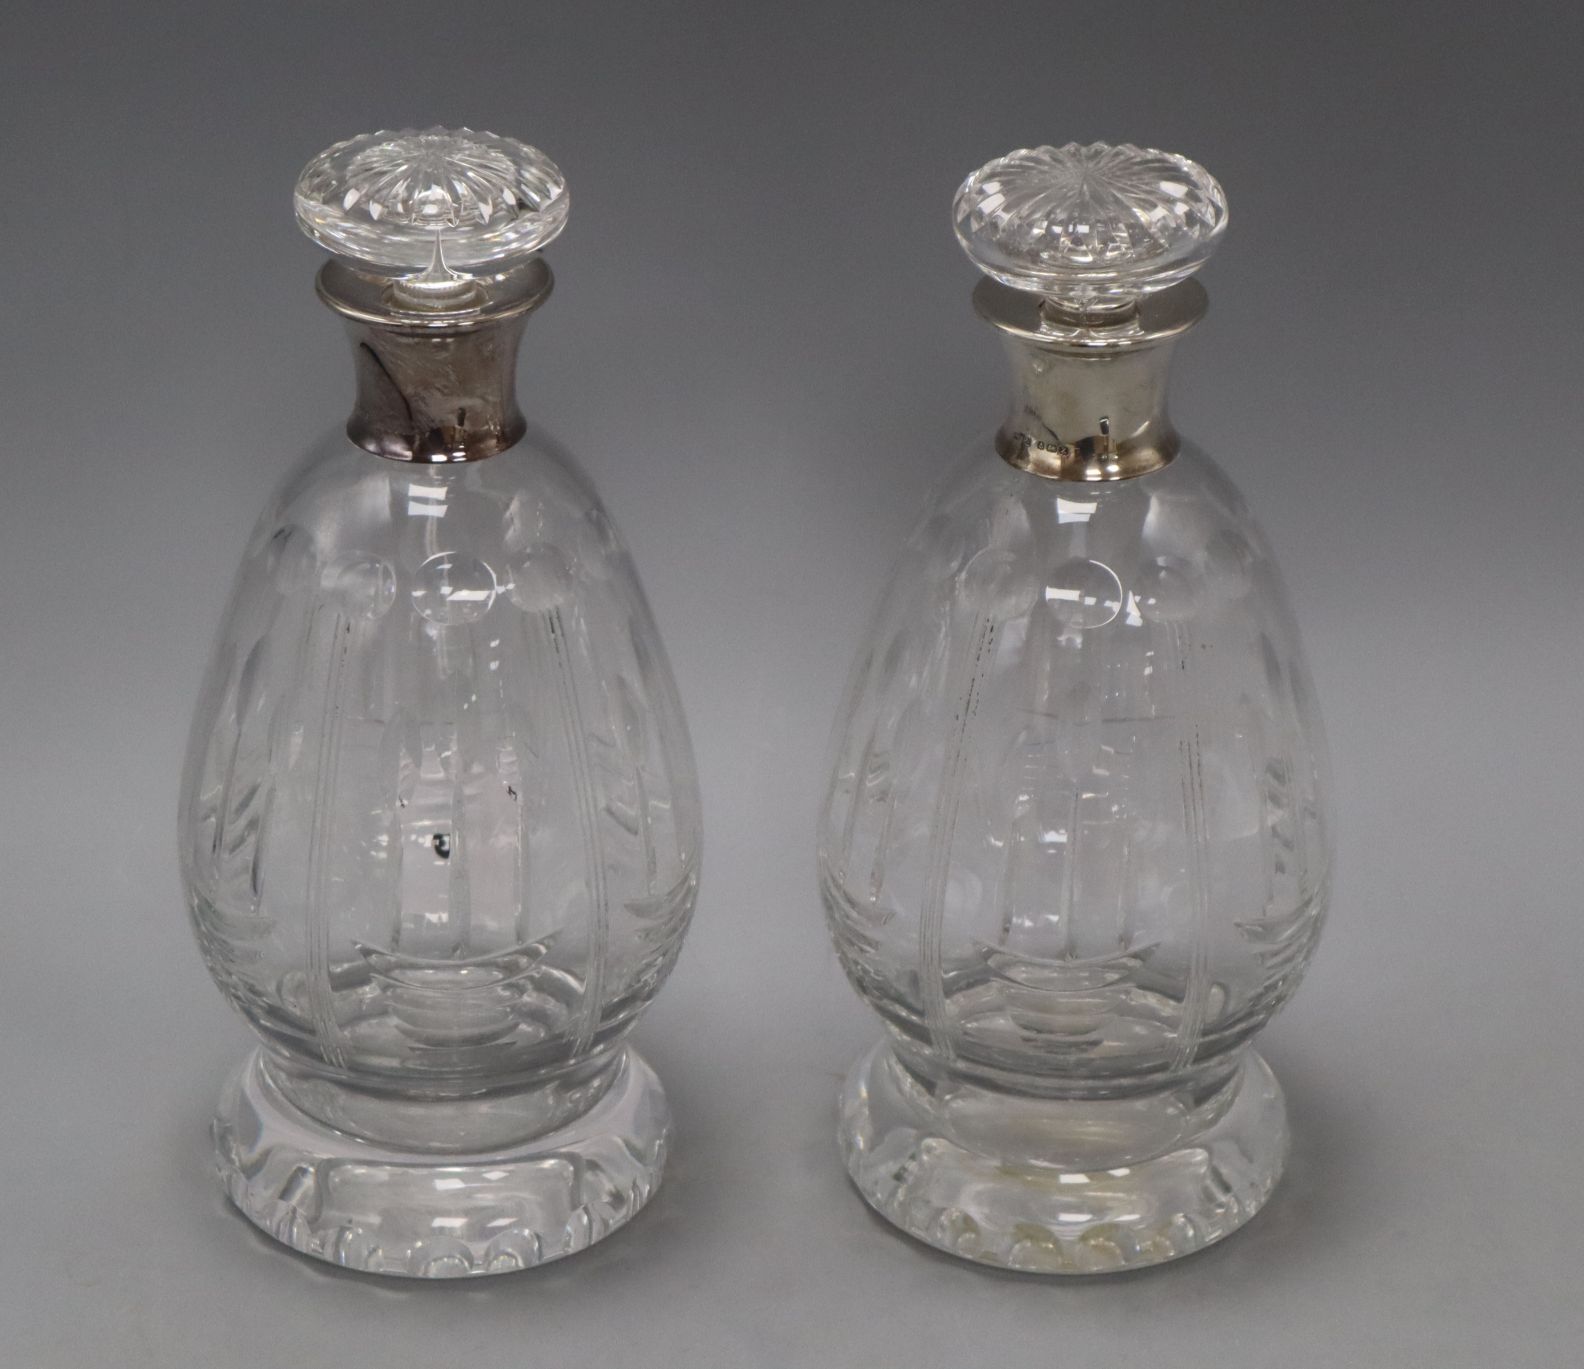 A pair of silver mounted decanters